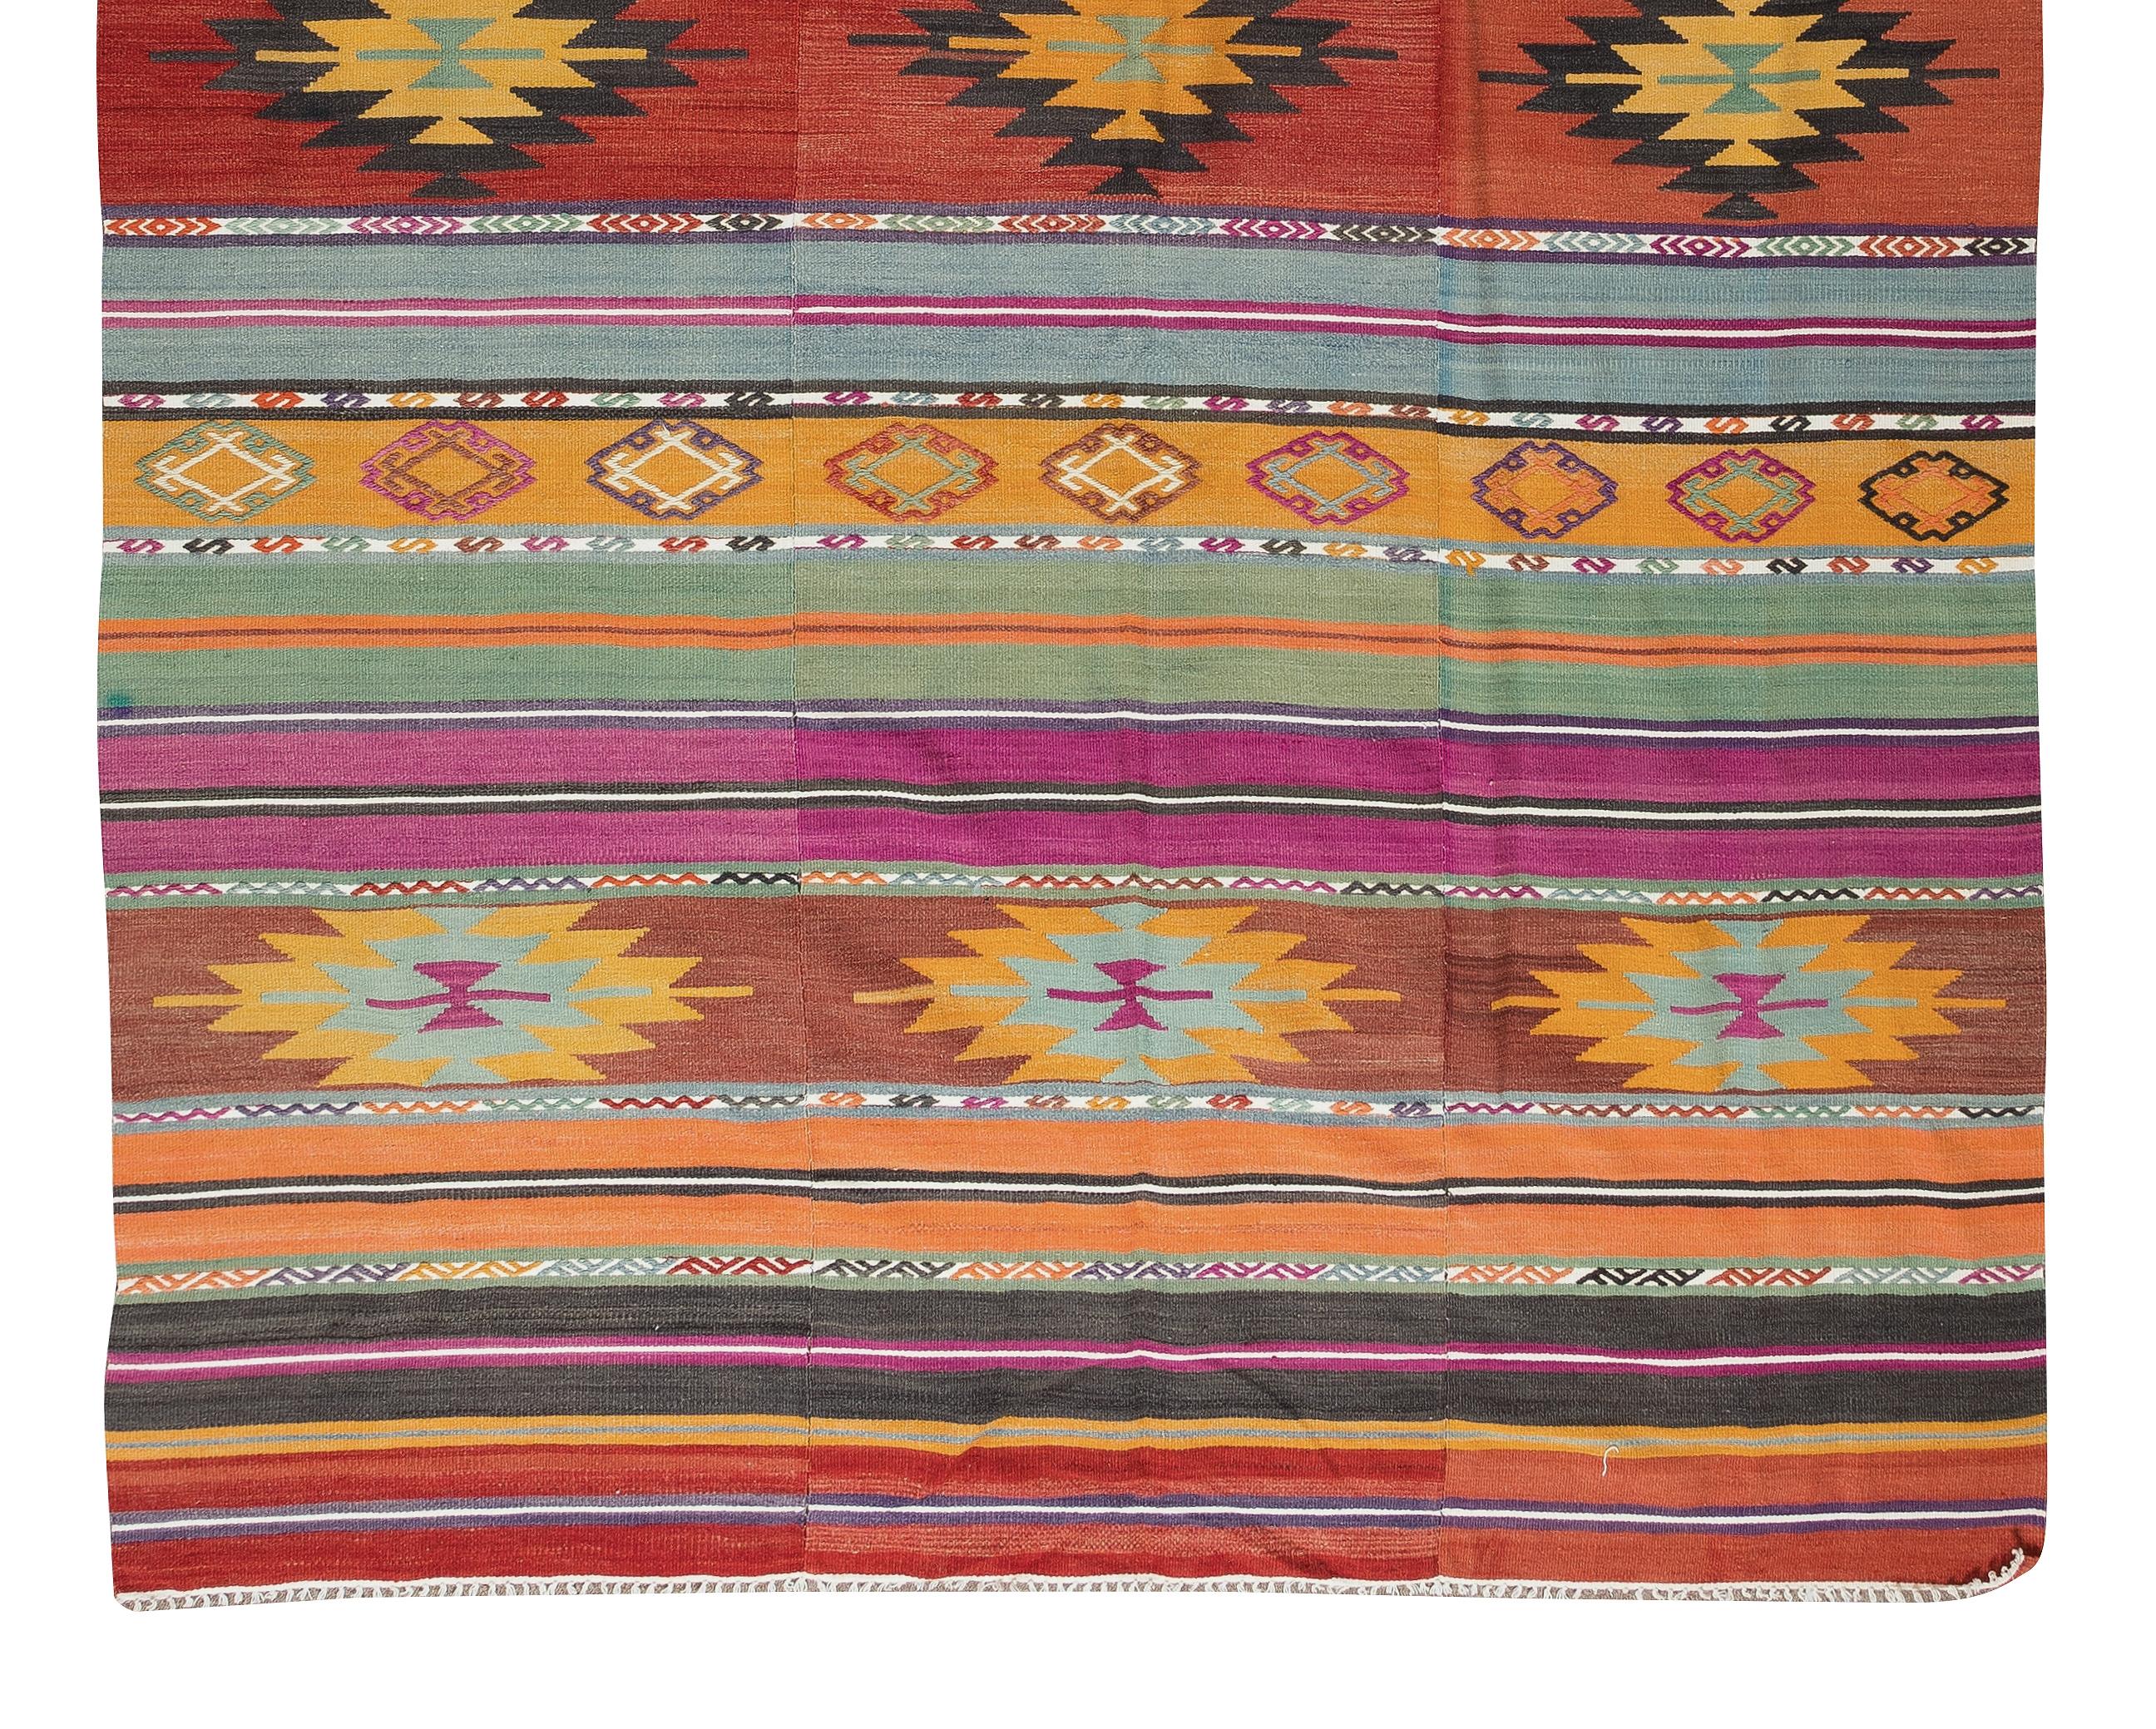 20th Century 5.8x9.3 Ft Vintage Hand Woven Kilim, Colorful Rug, Turkish Carpet, 100% Wool For Sale